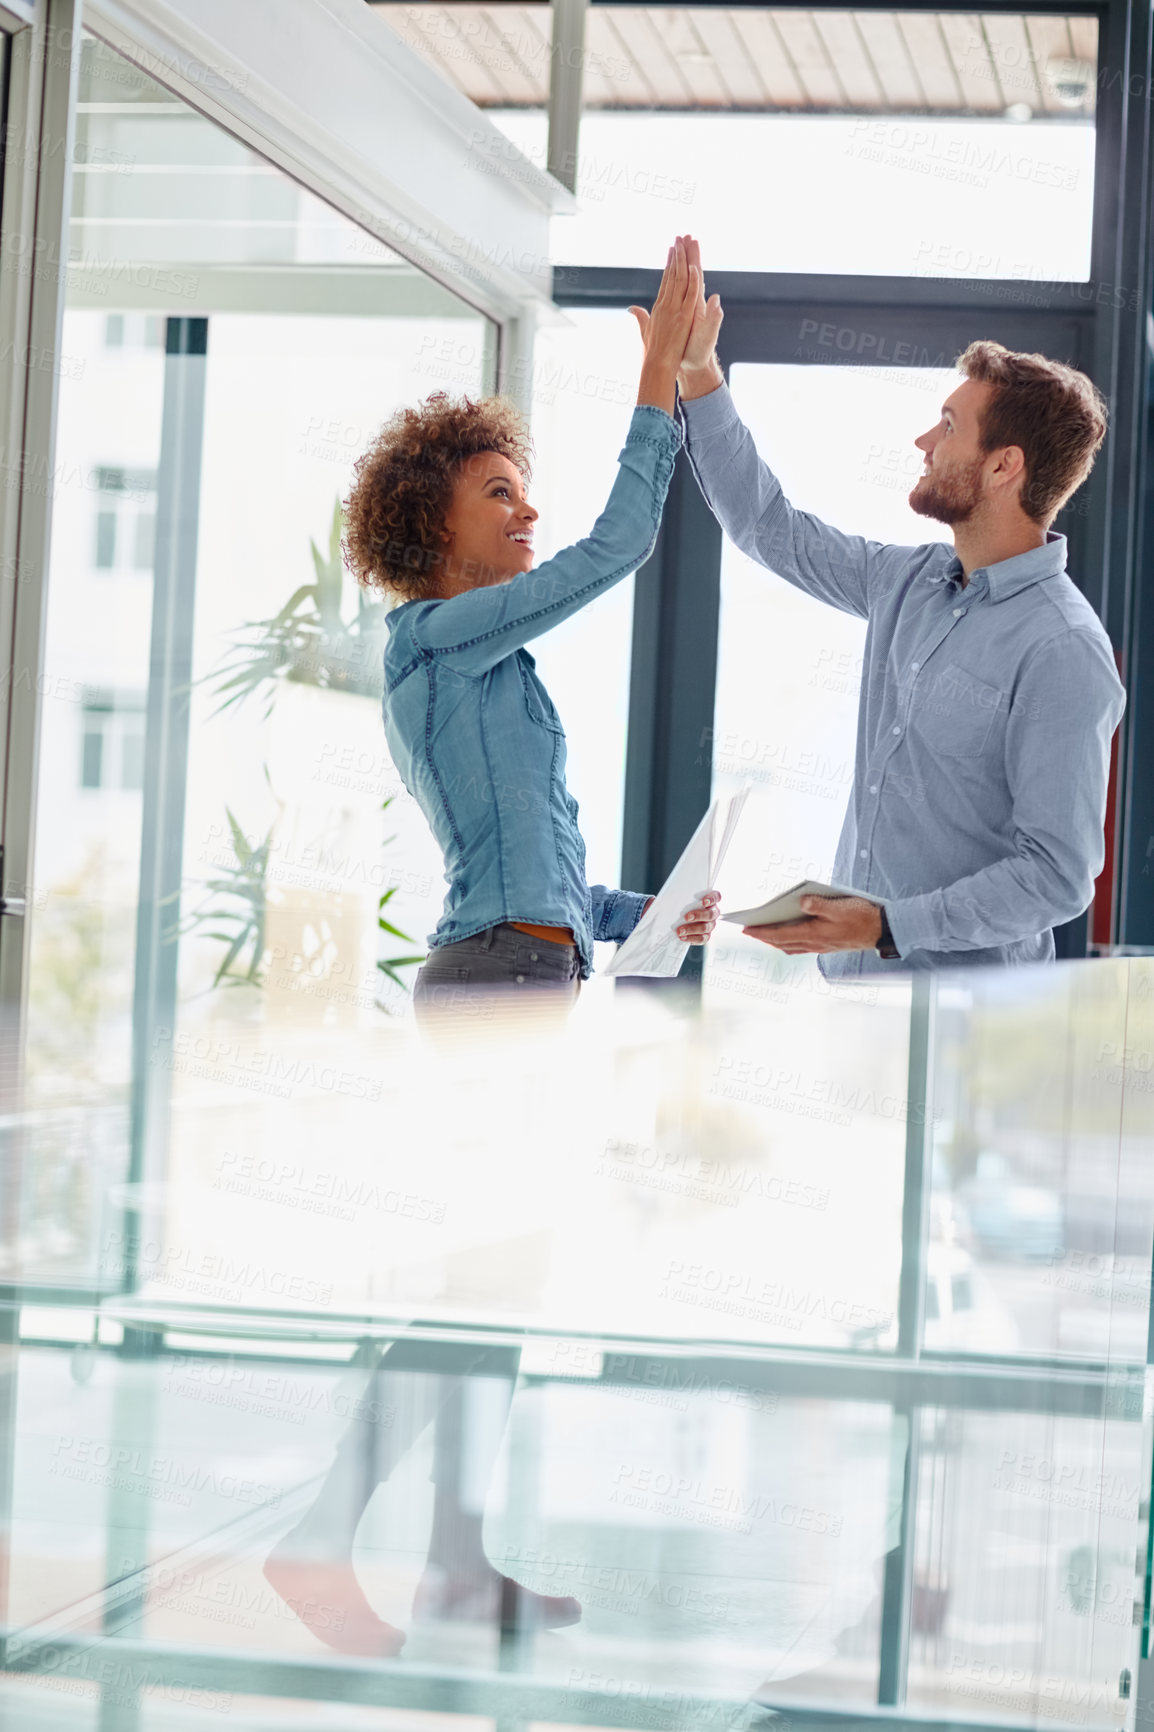 Buy stock photo Shot of two colleagues high fiving each other in an office